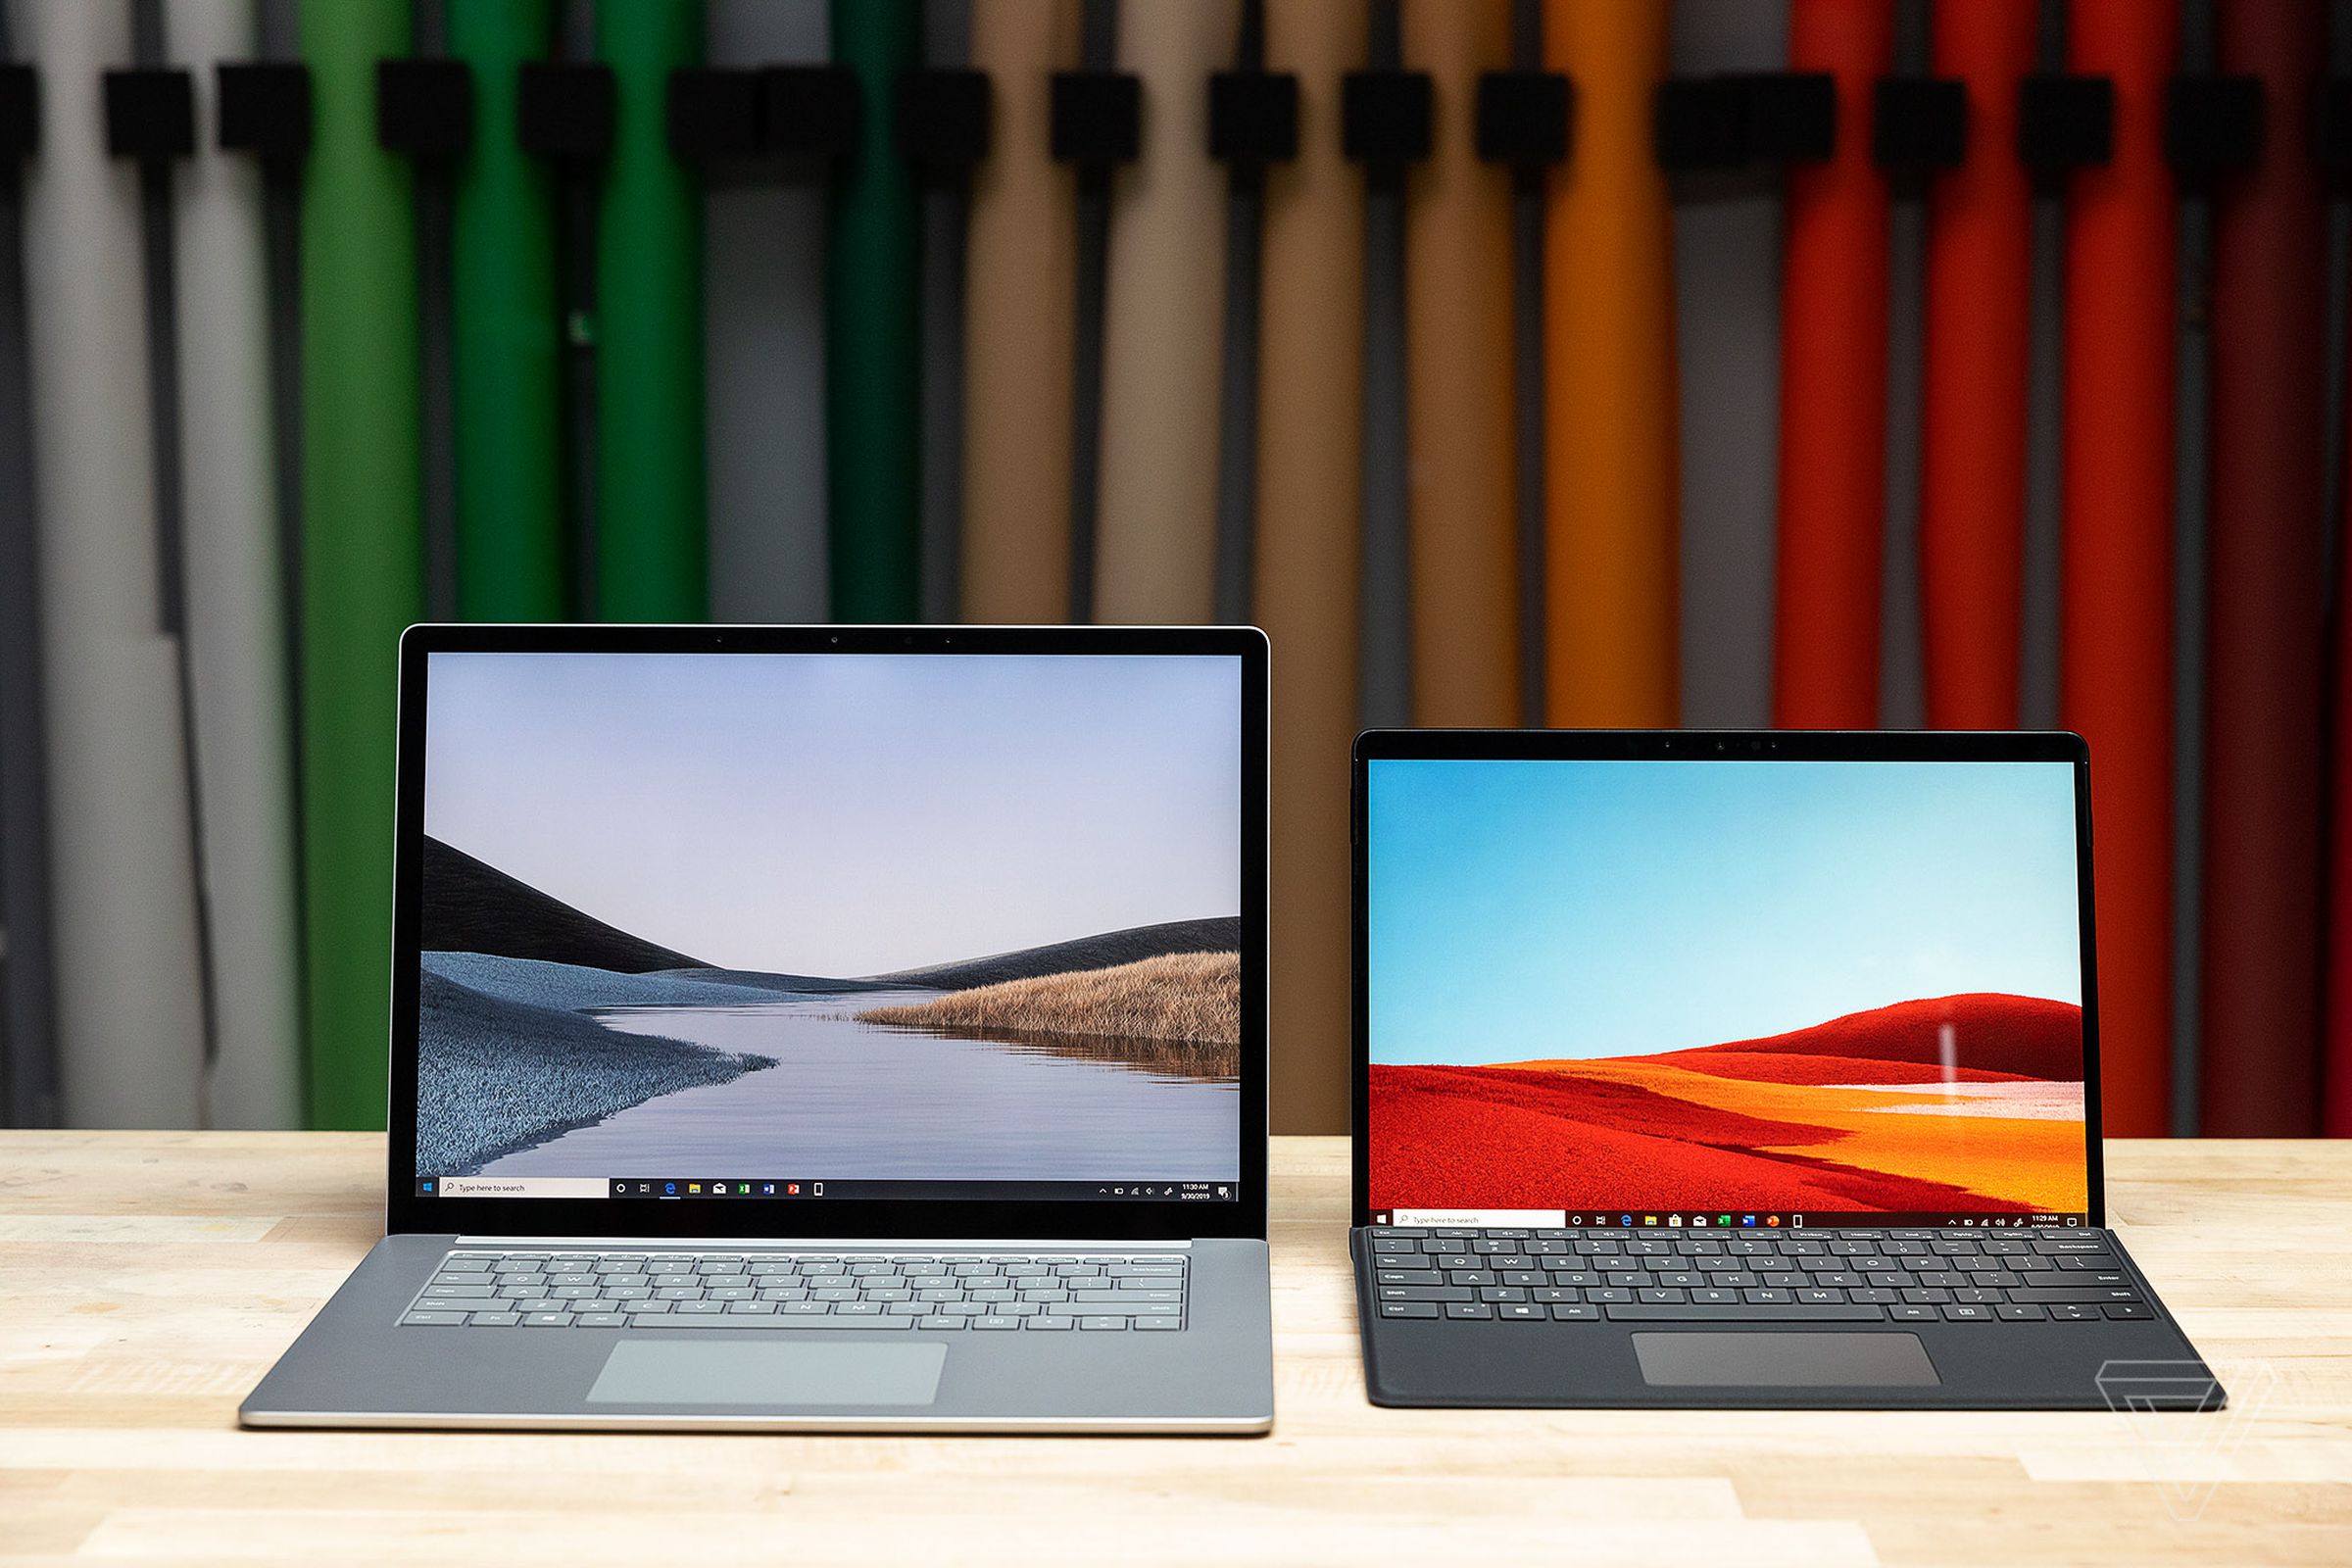 Microsoft’s Surface Laptop 3 and Surface Pro X